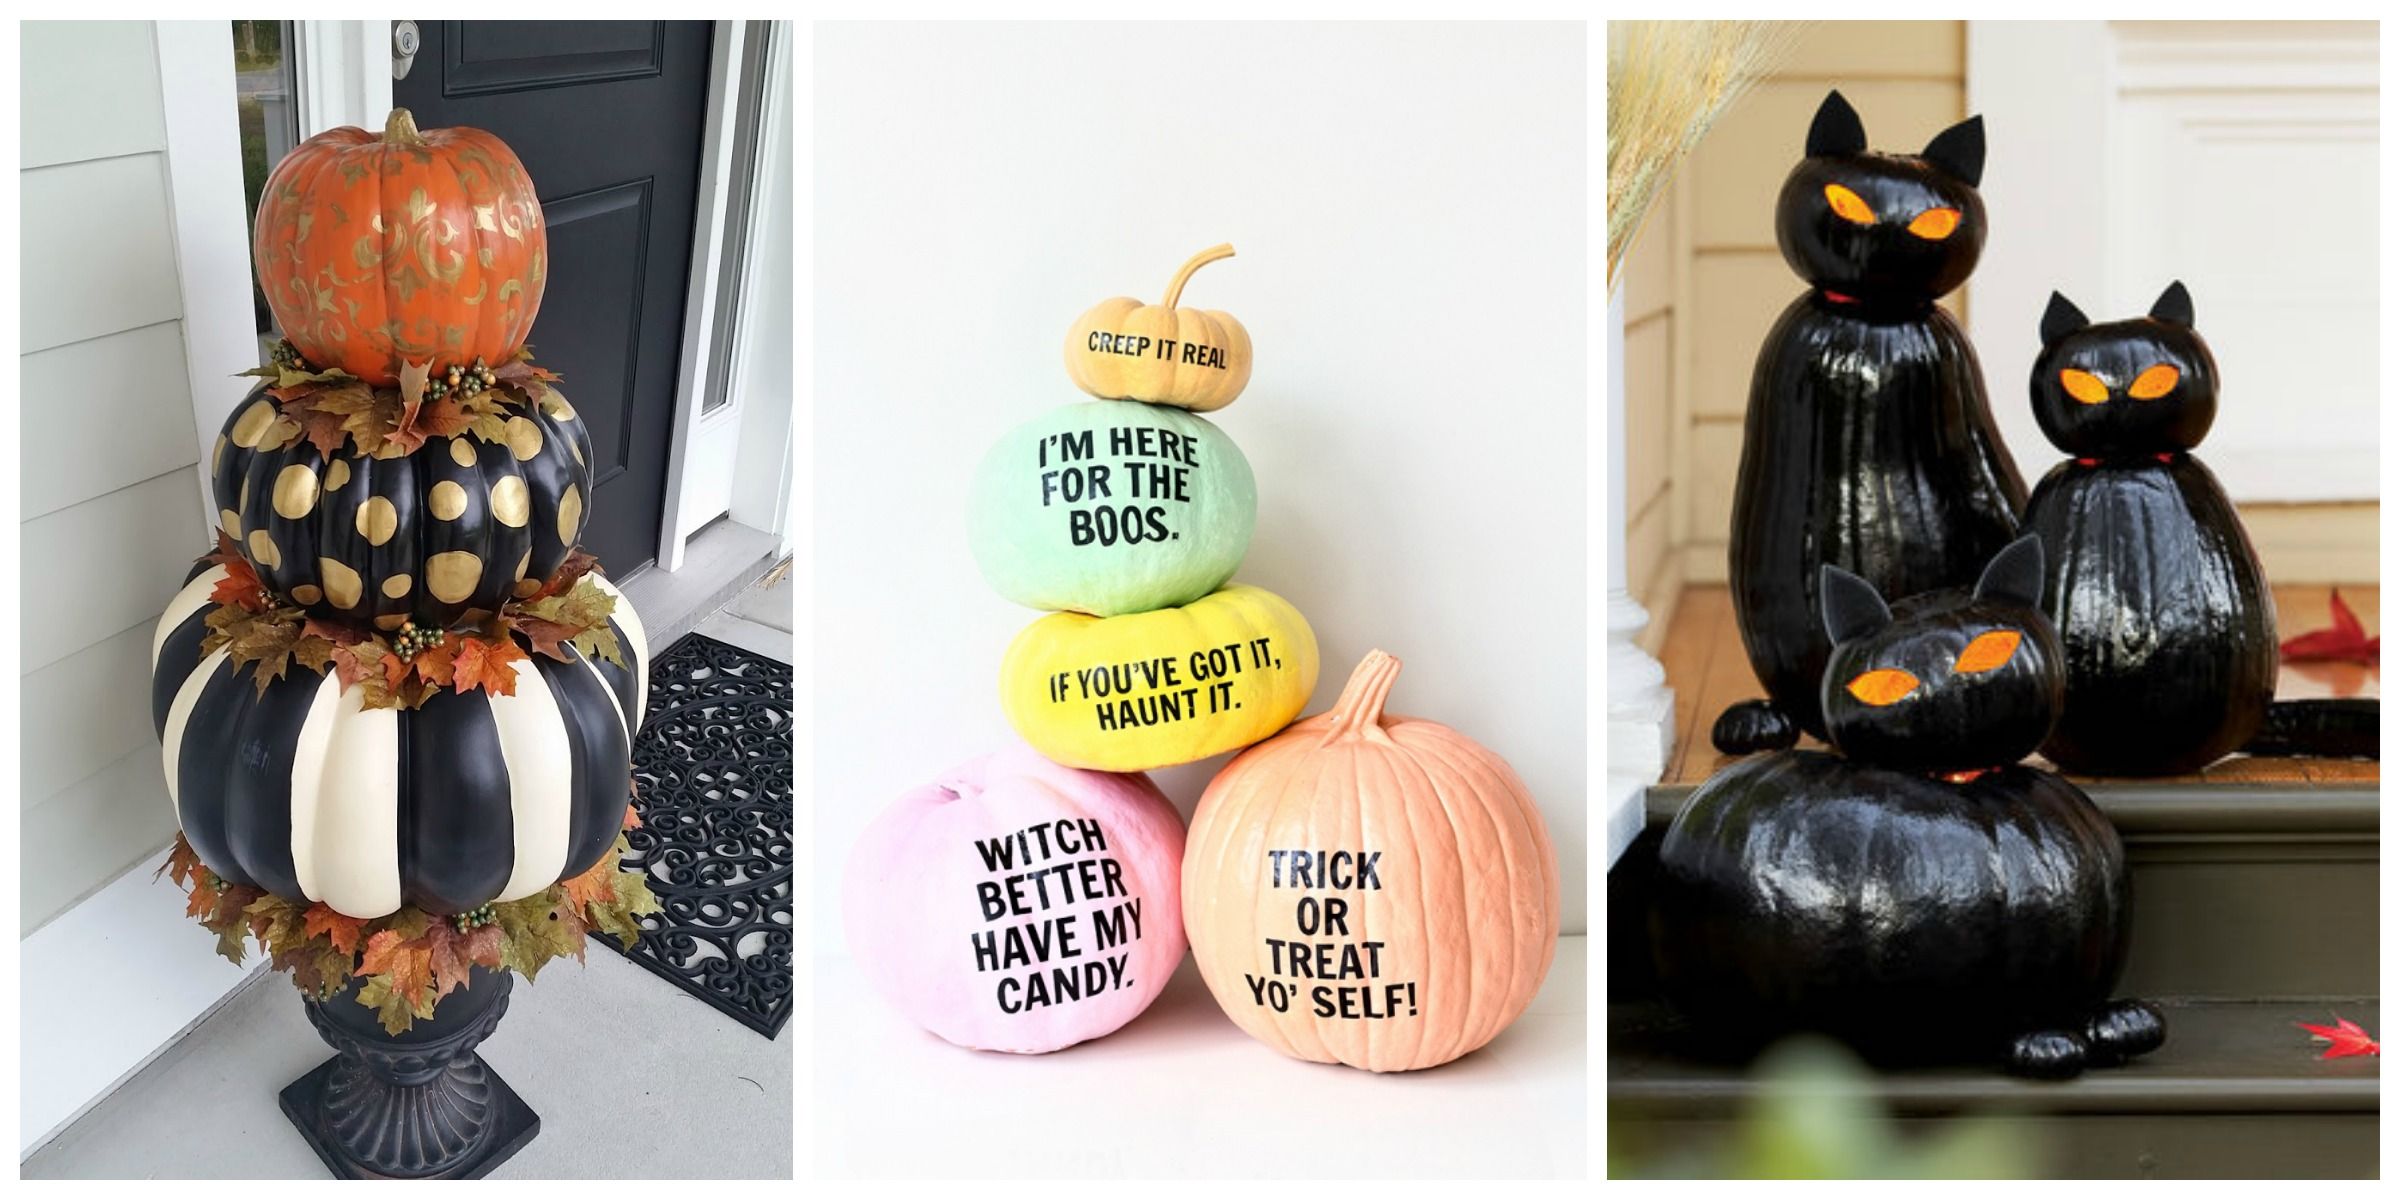 32 Easy Pumpkin Decorating Ideas - How to Decorate with Real Pumpkins